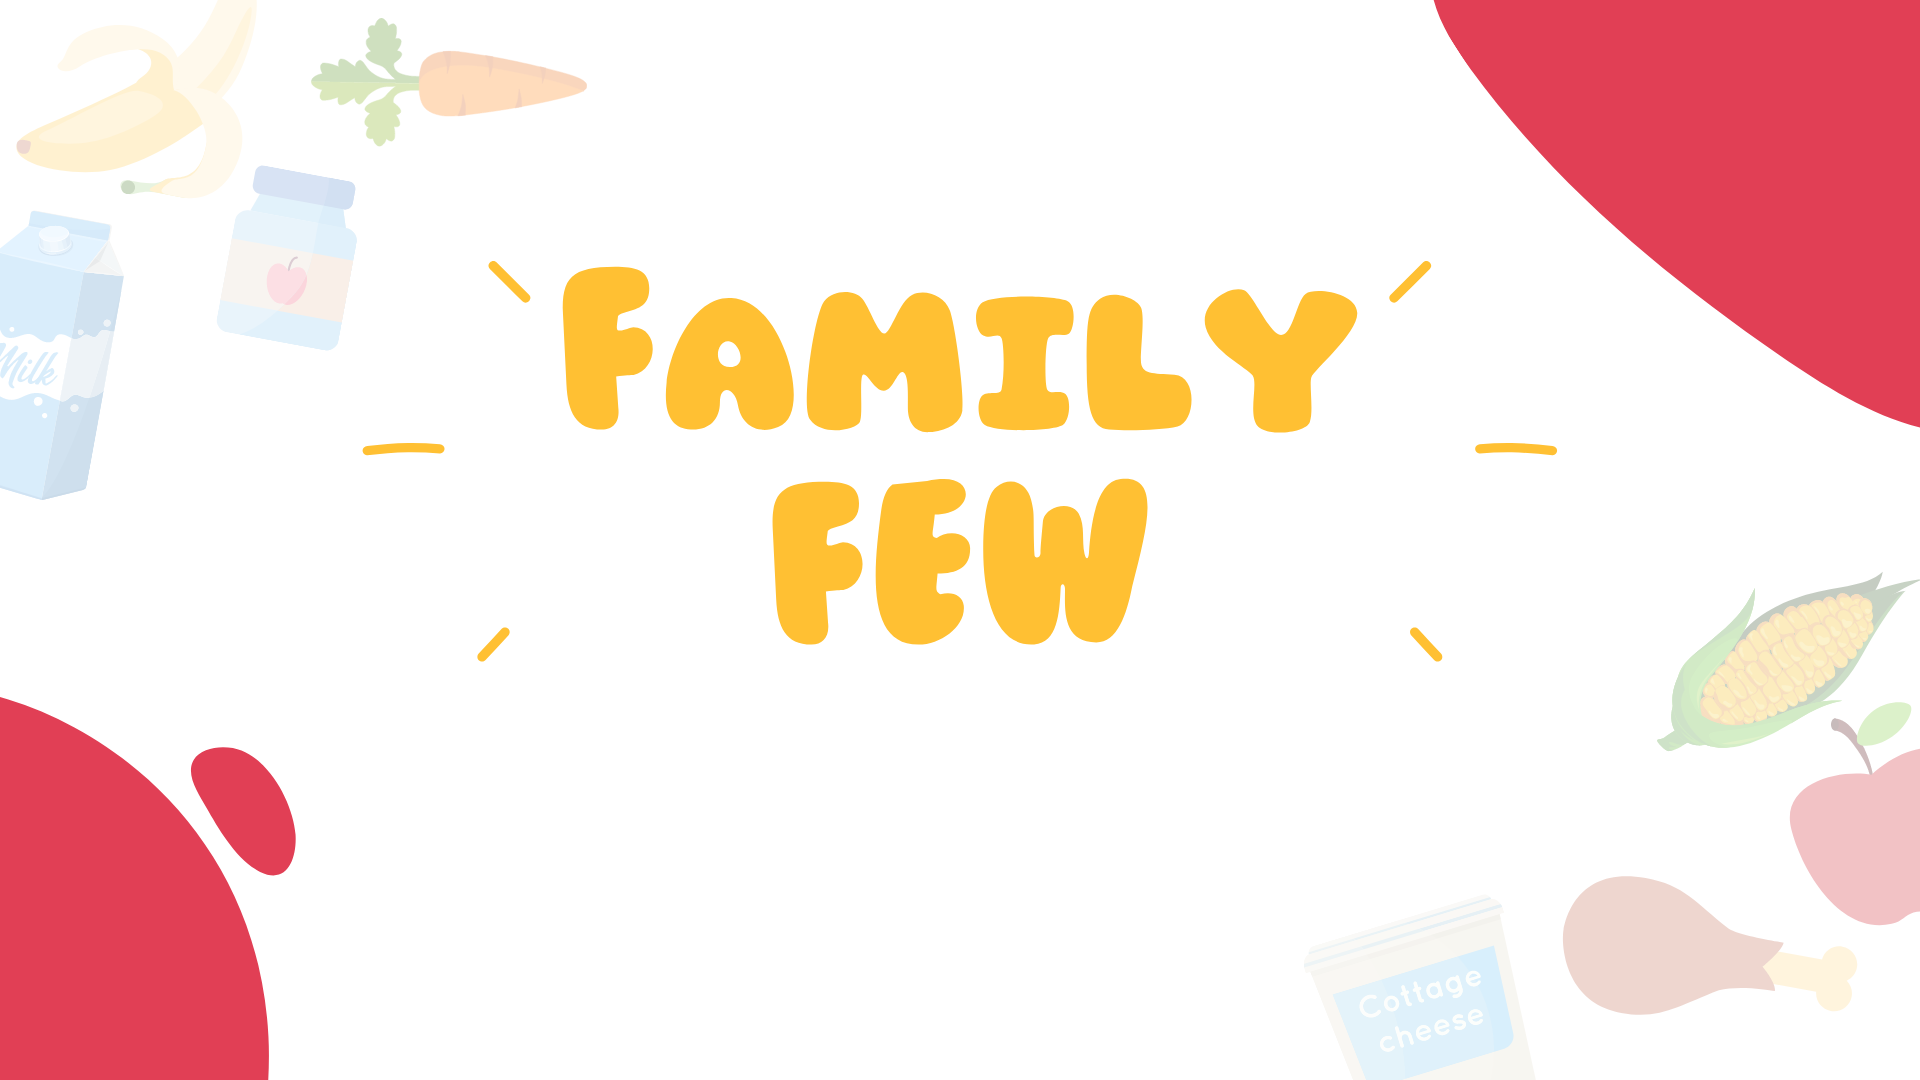 User Interface Design and Implementation Team Project: Family Few